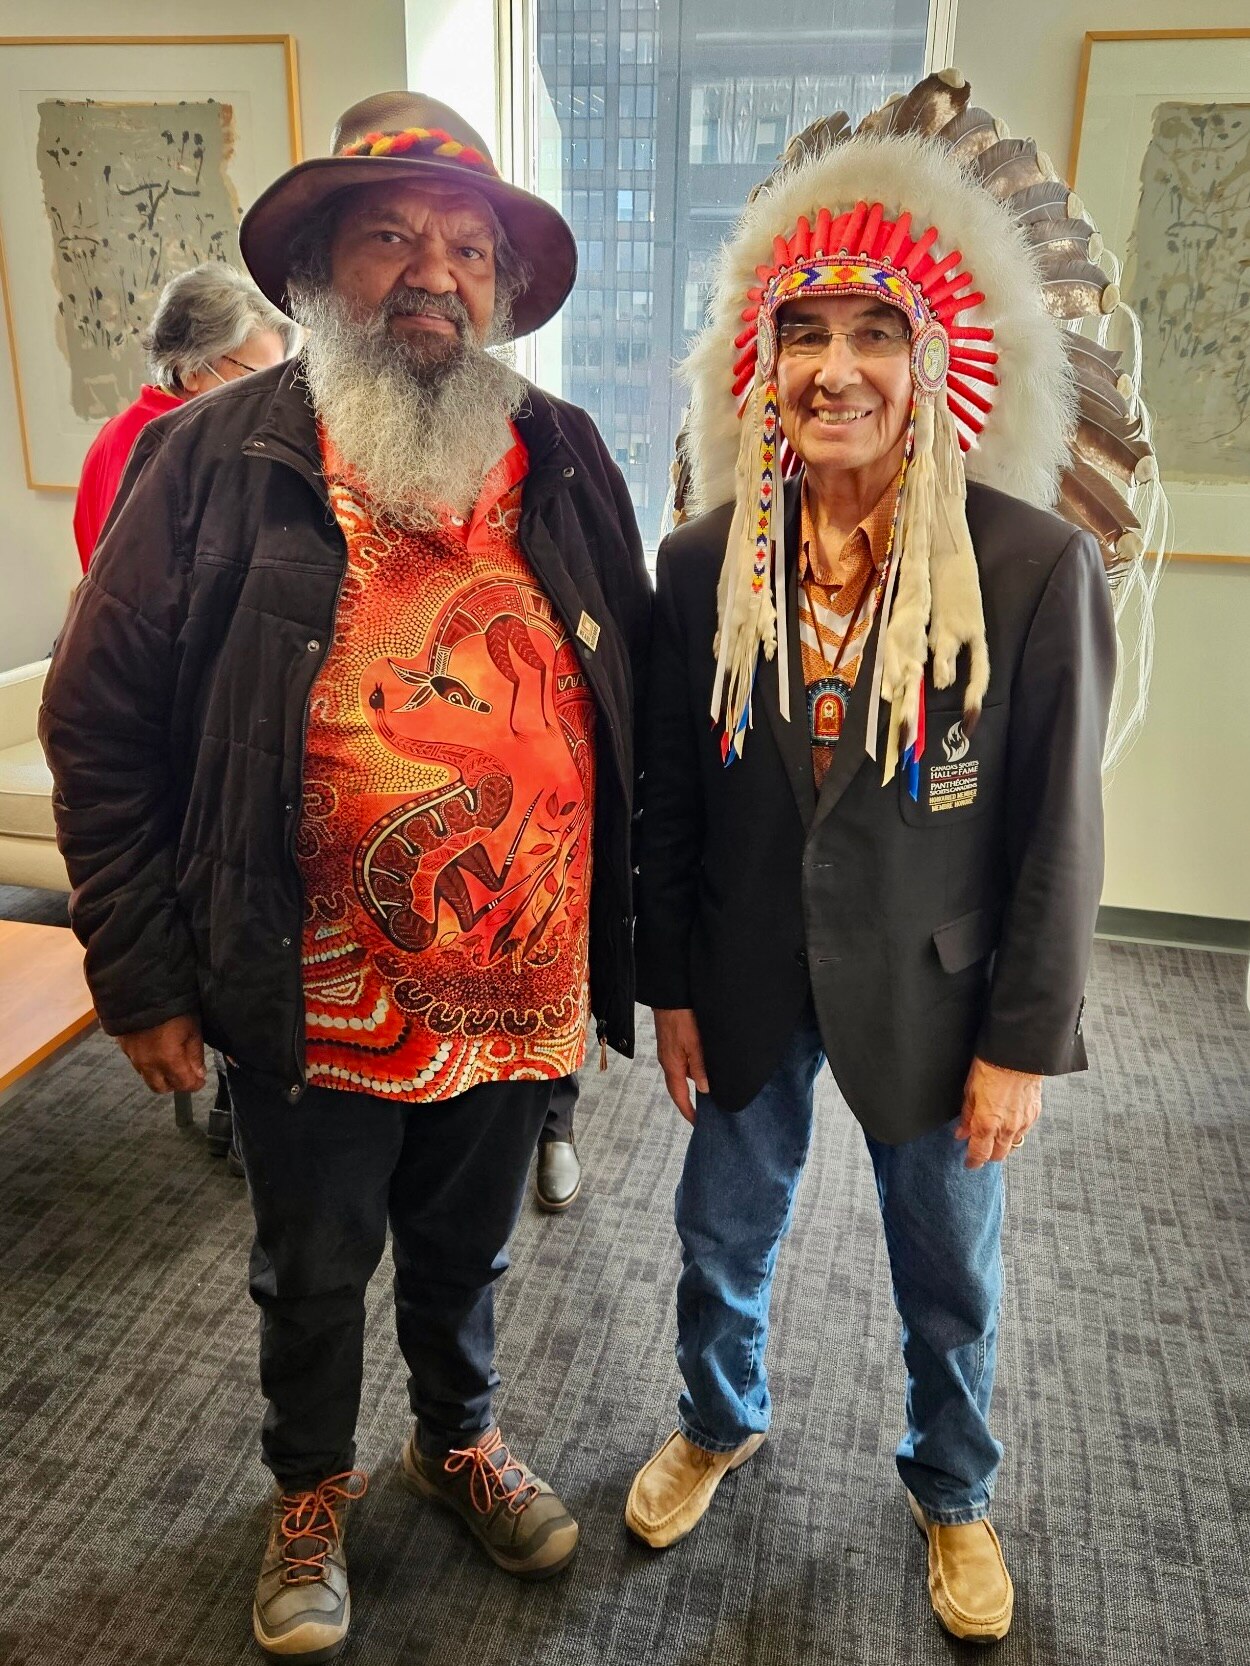 Aboriginal elder and native American leader with feathery headpiece standing together